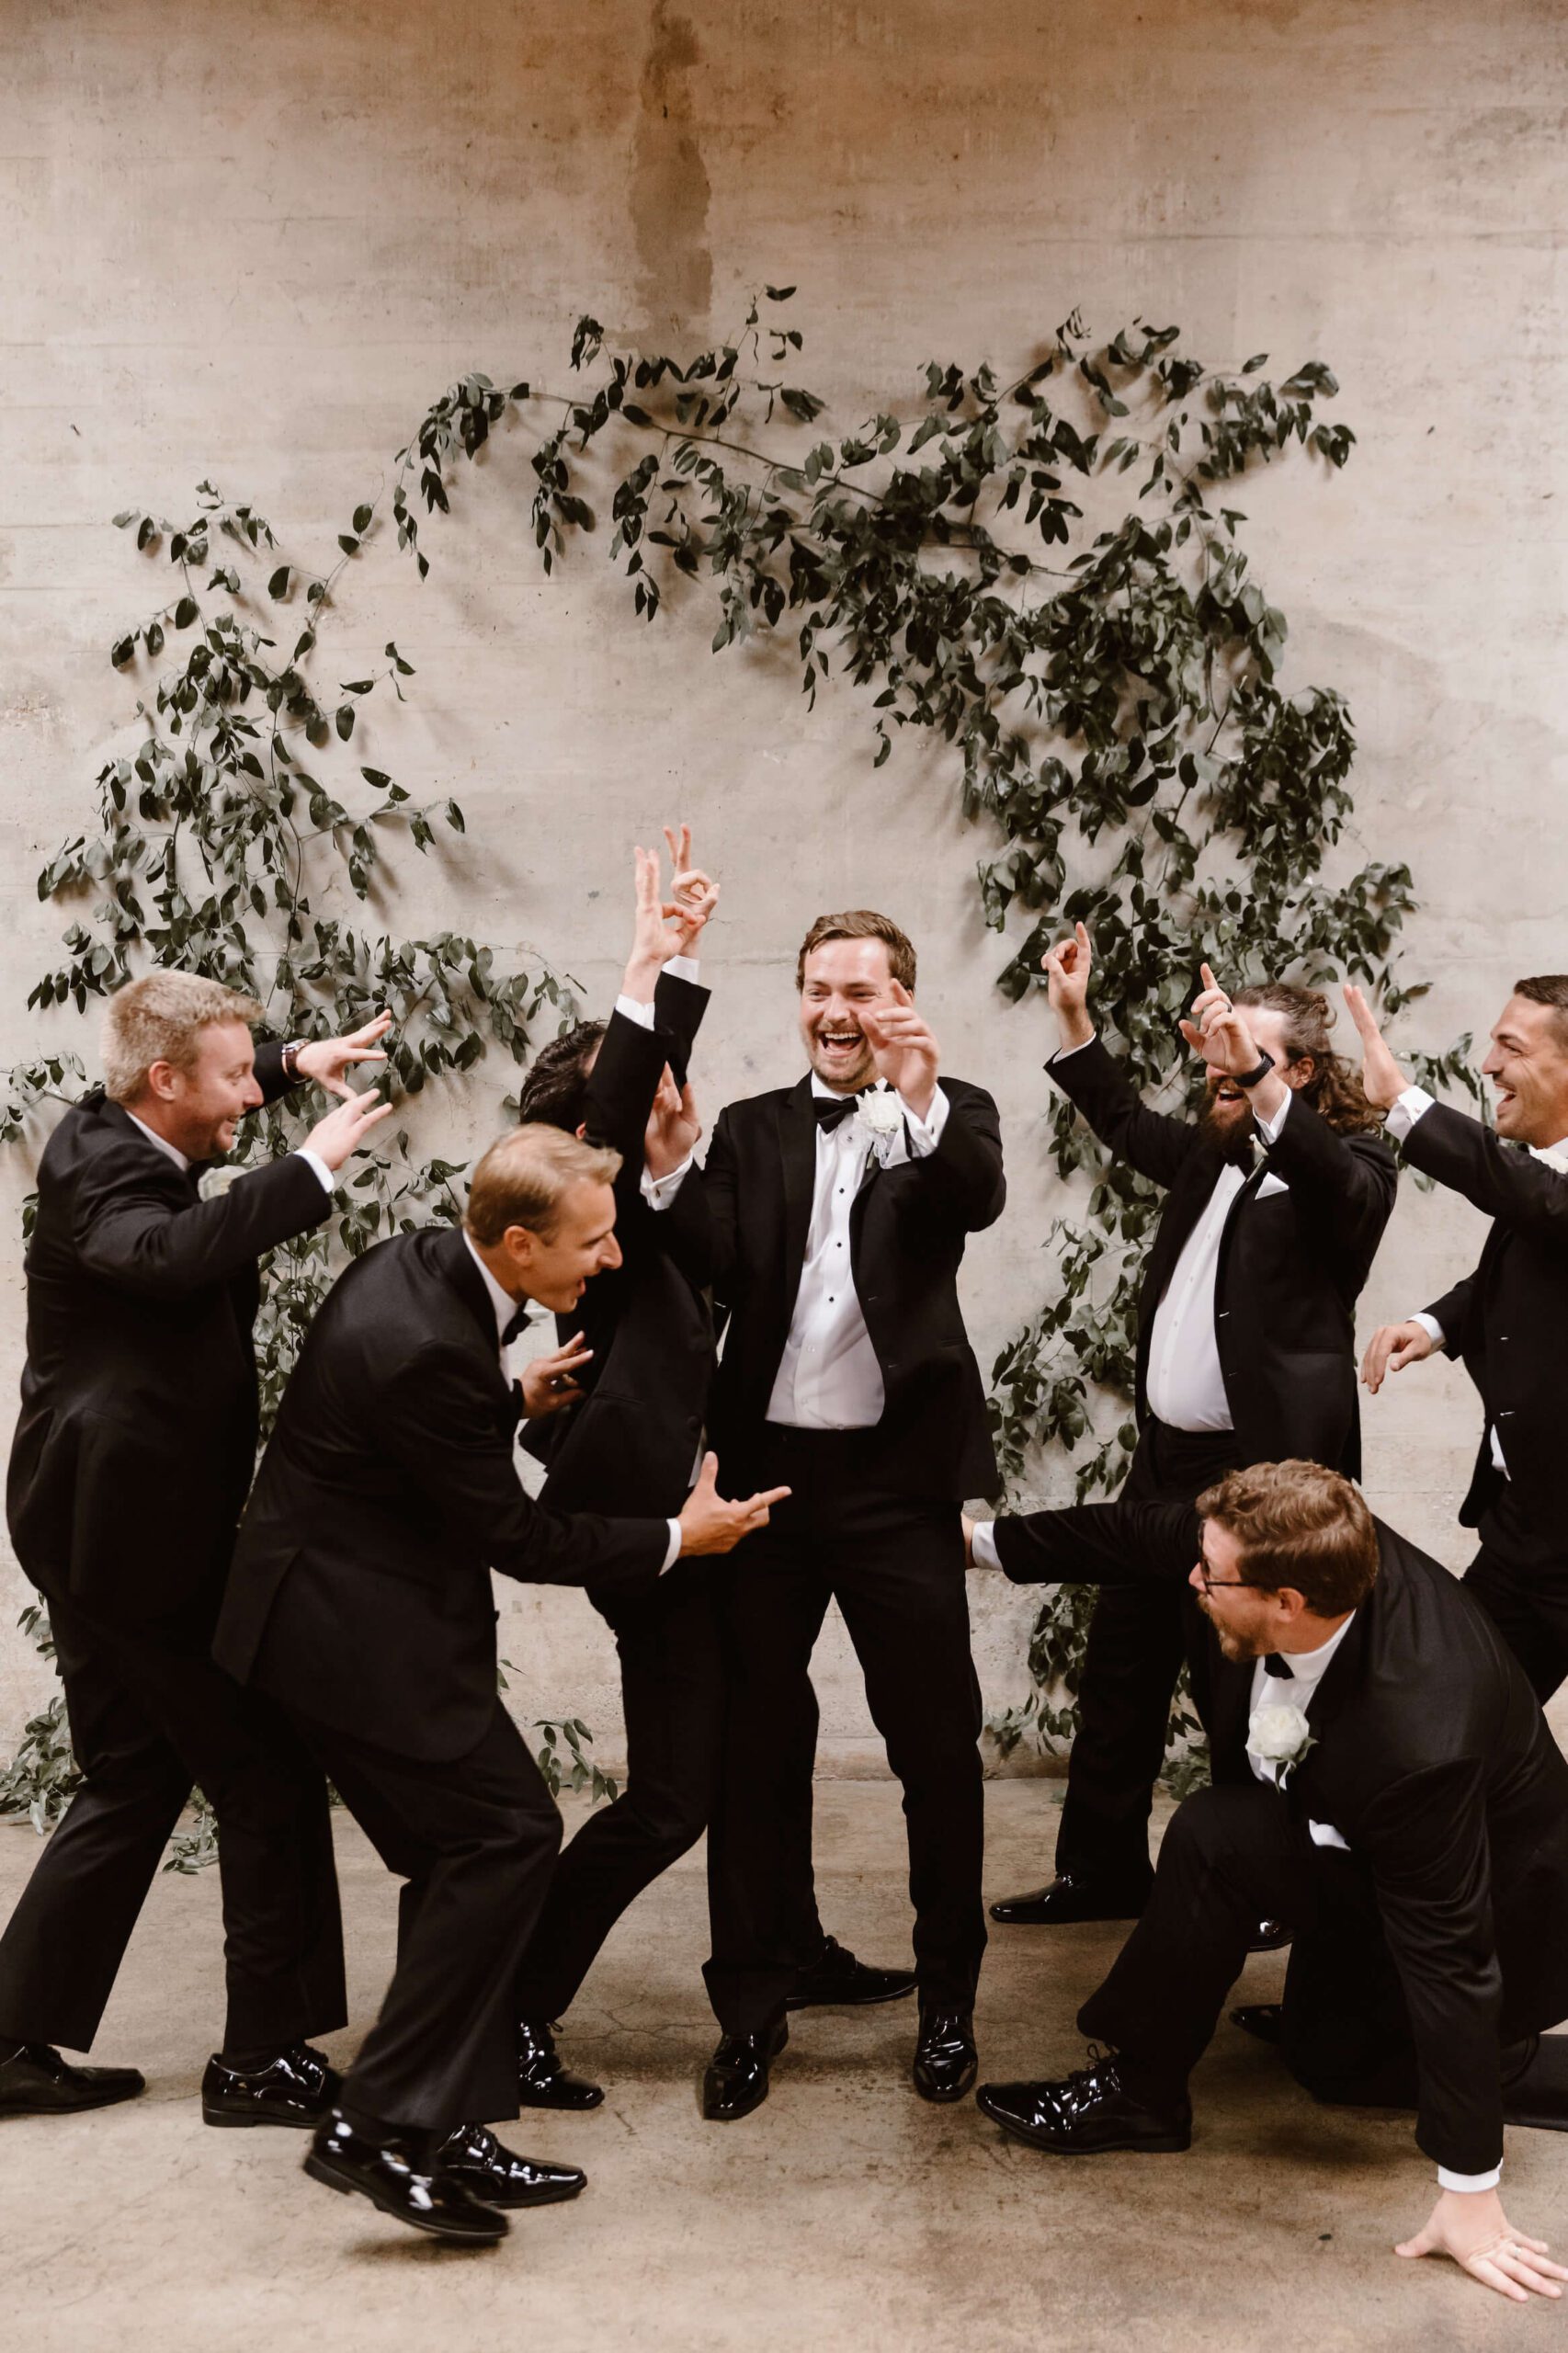 groom and groomsmen celebrating at wedding aisle in black tux suits